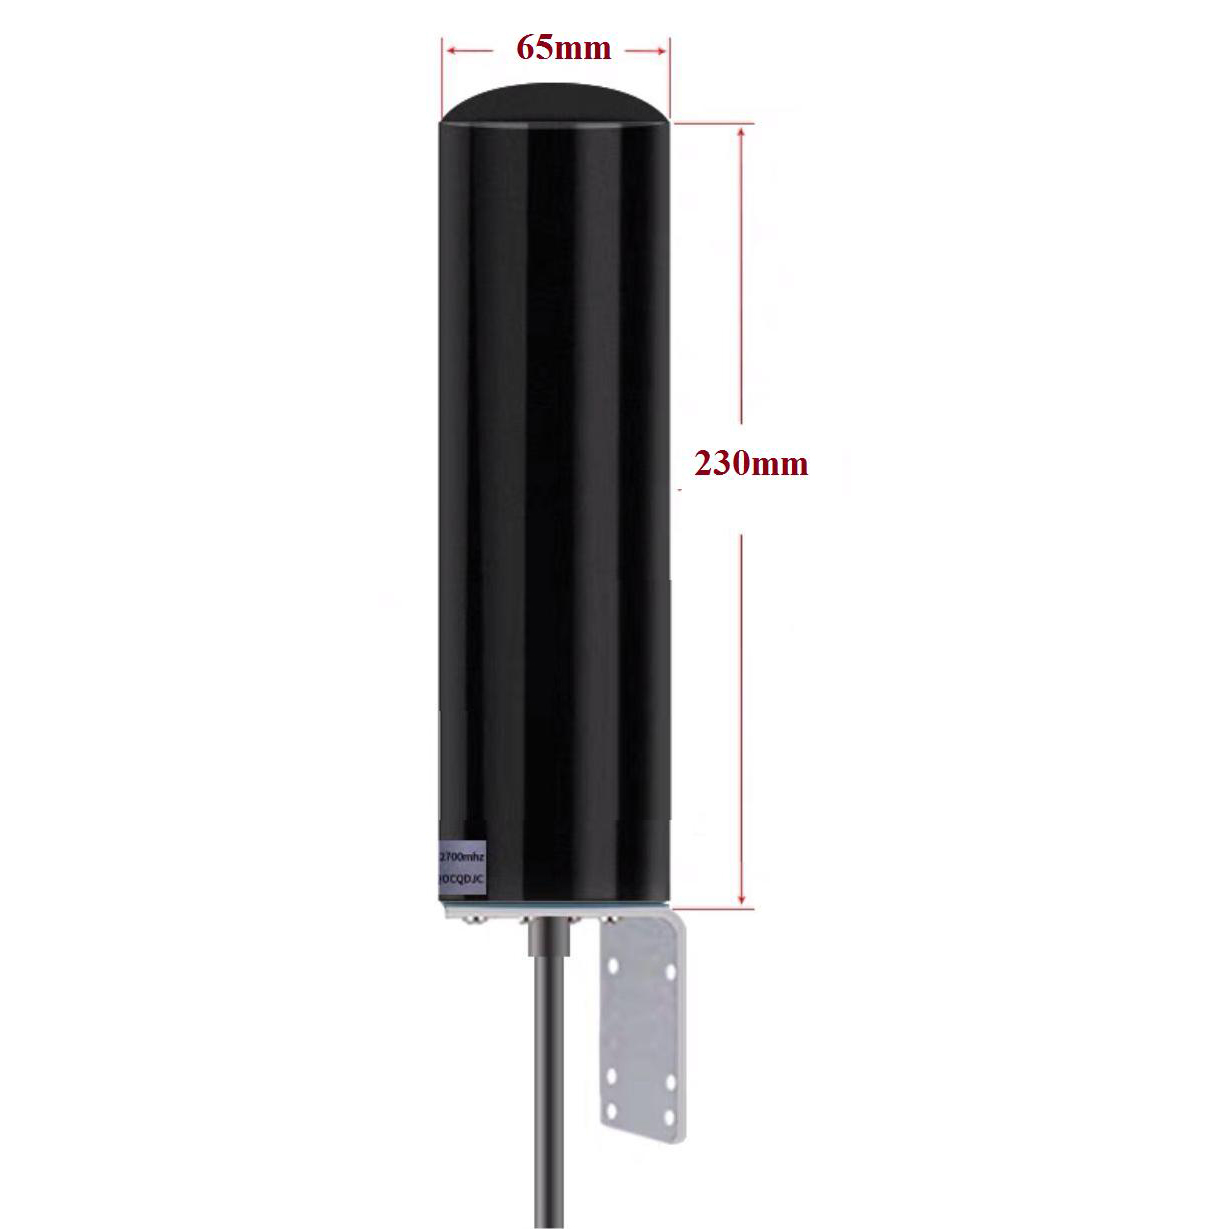 Best 4G Mobile Repeater for Improved Signal Strength